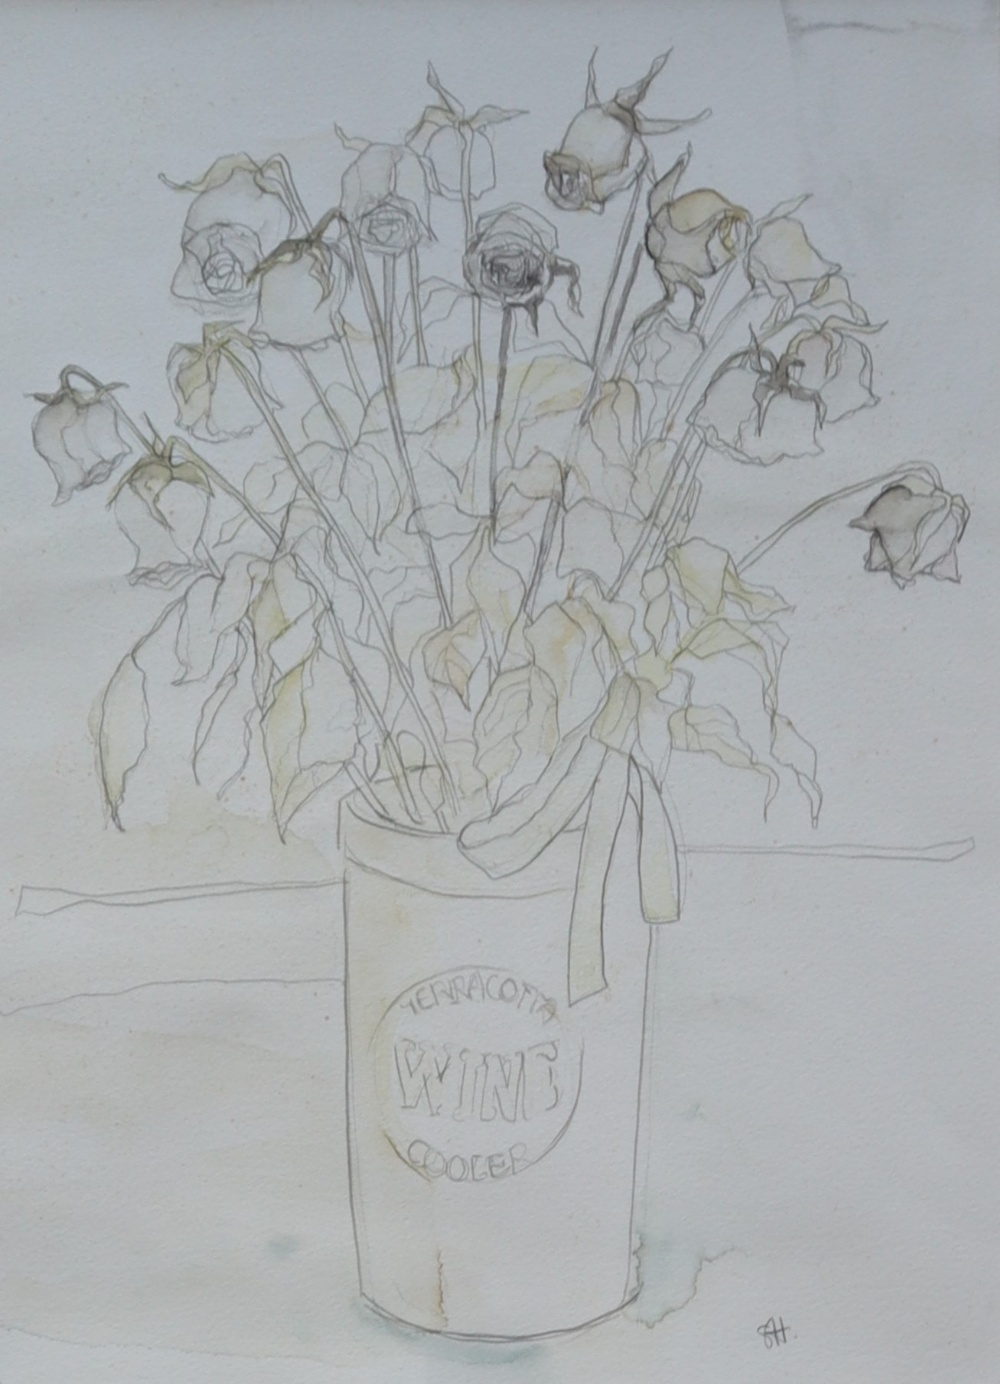 Sarah Hopkins Fading flowers Pencil drawing Initialled 43 x 31cm ***Artists resale rights may